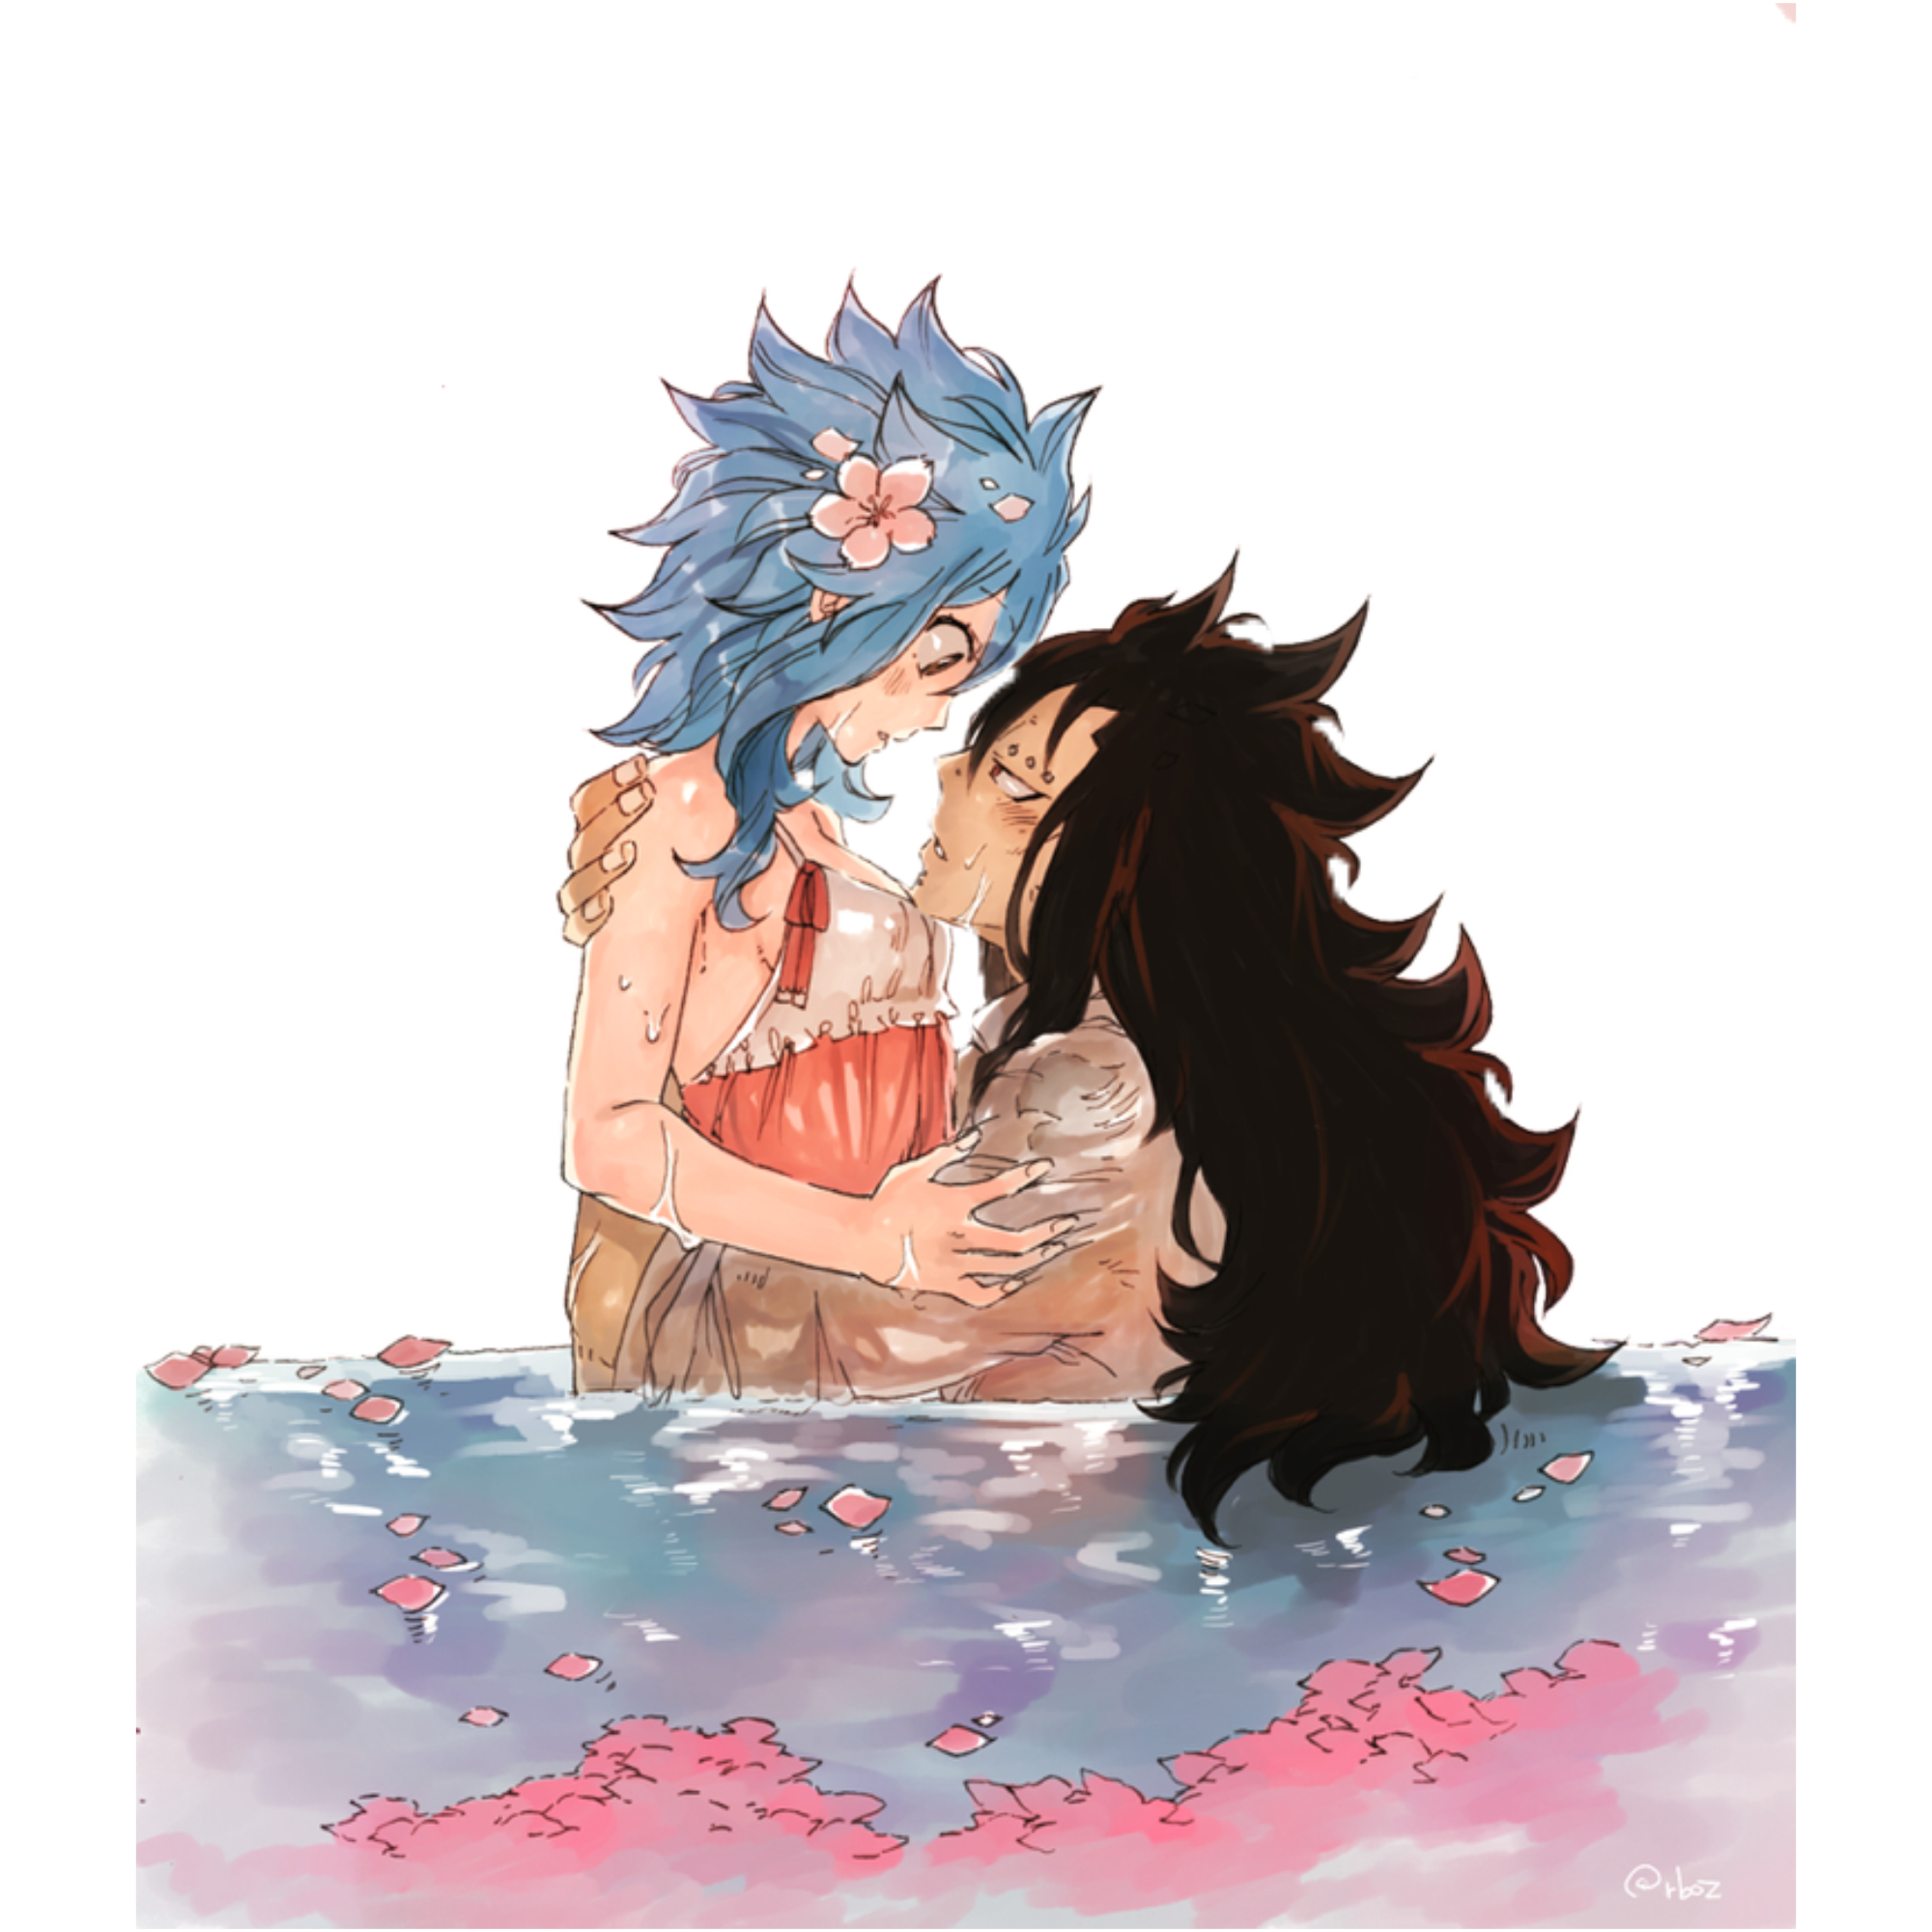 This visual is about gajevy gale fairytail gajeel levy freetoedit #gajevy #...